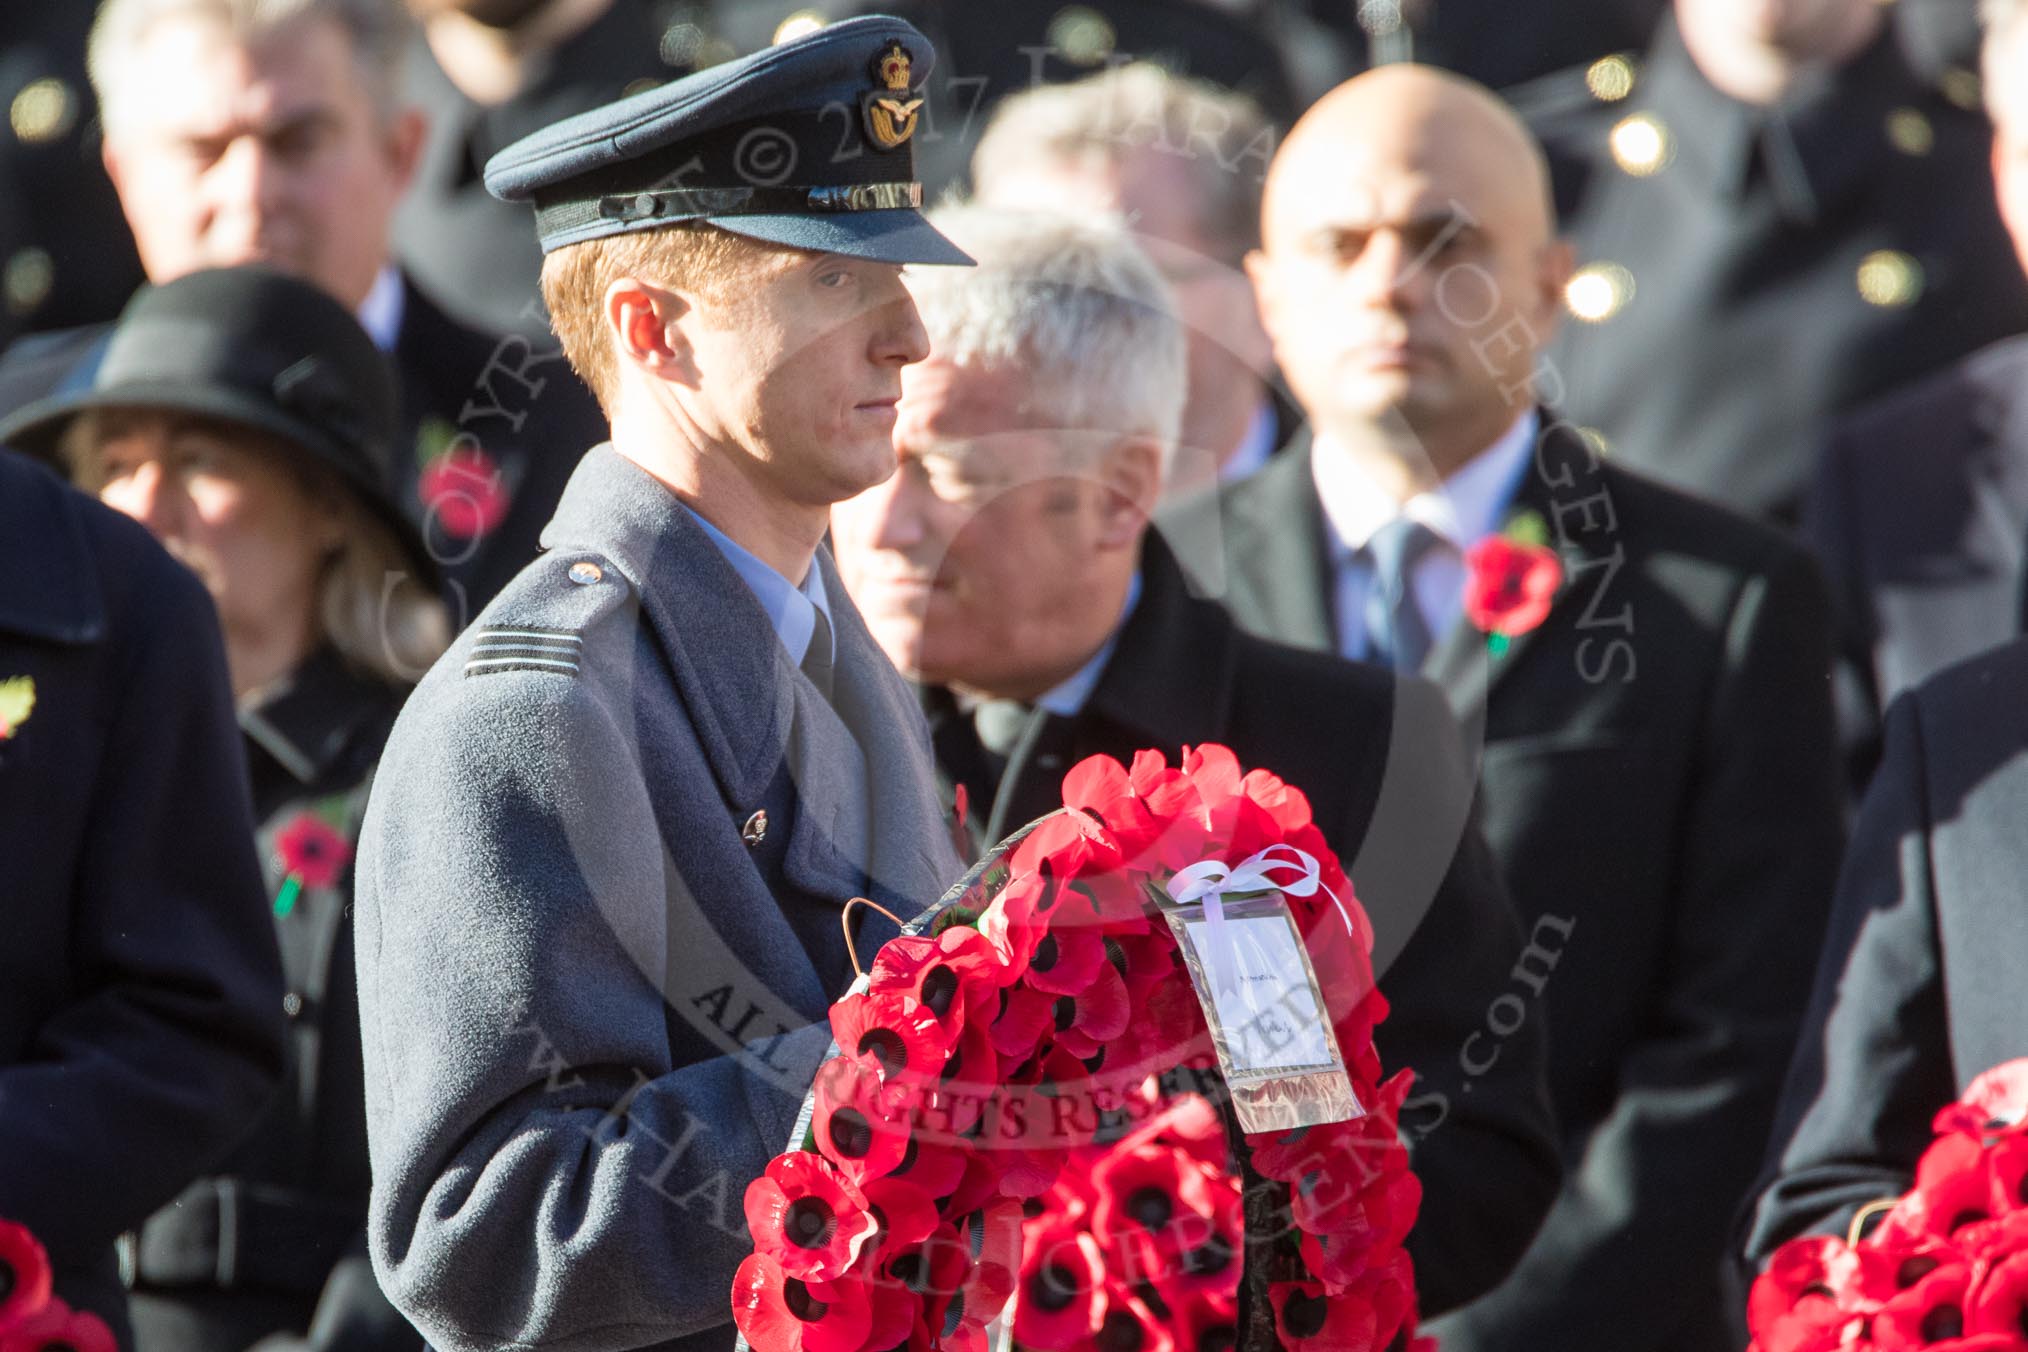 Flight Lieutenant David Rawson, Royal Air Force, Equerry to Prince Michael of Kent, during the Remembrance Sunday Cenotaph Ceremony 2018 at Horse Guards Parade, Westminster, London, 11 November 2018, 10:59.